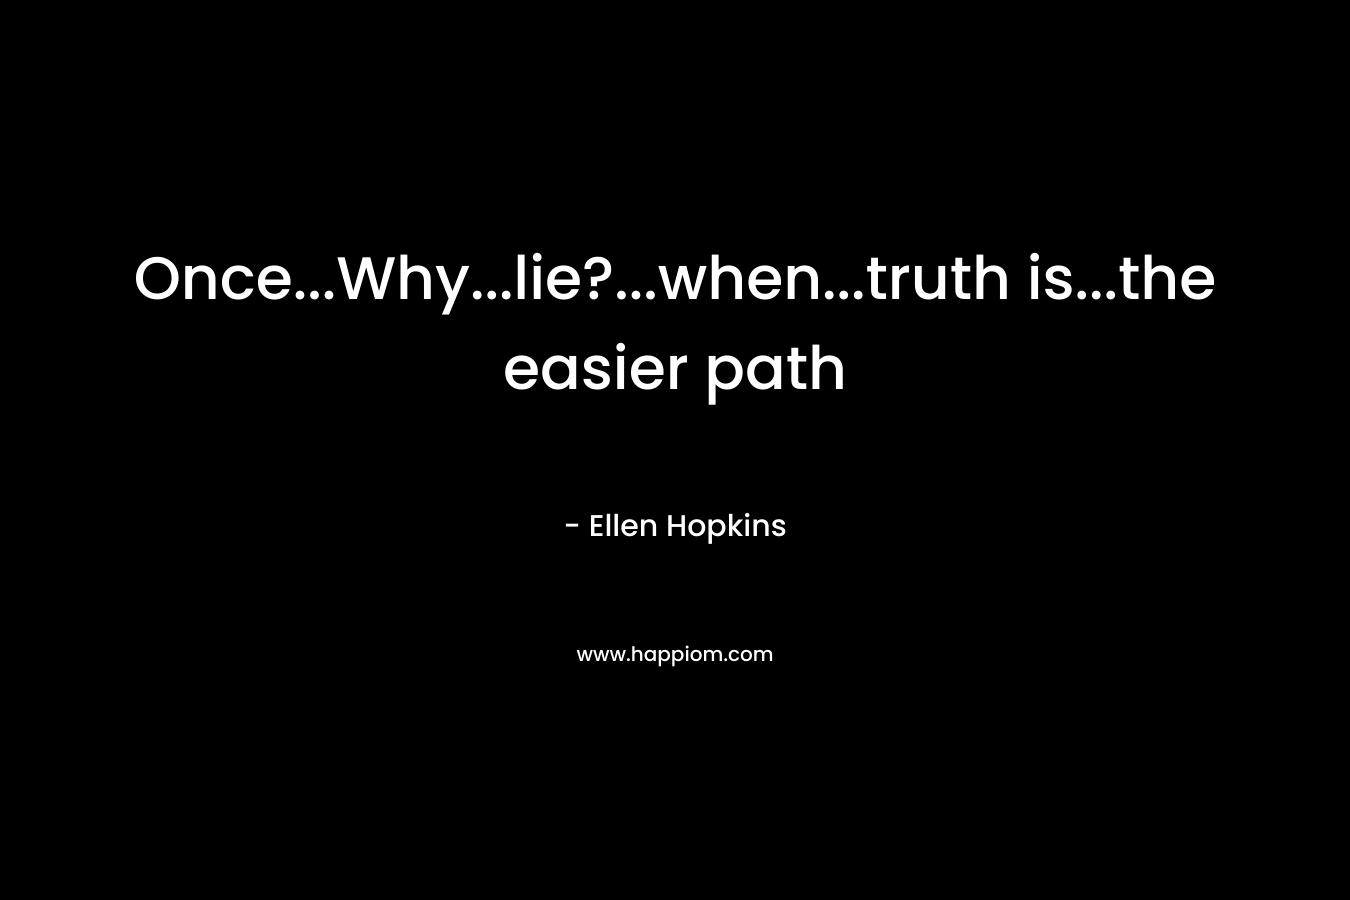 Once...Why...lie?...when...truth is...the easier path